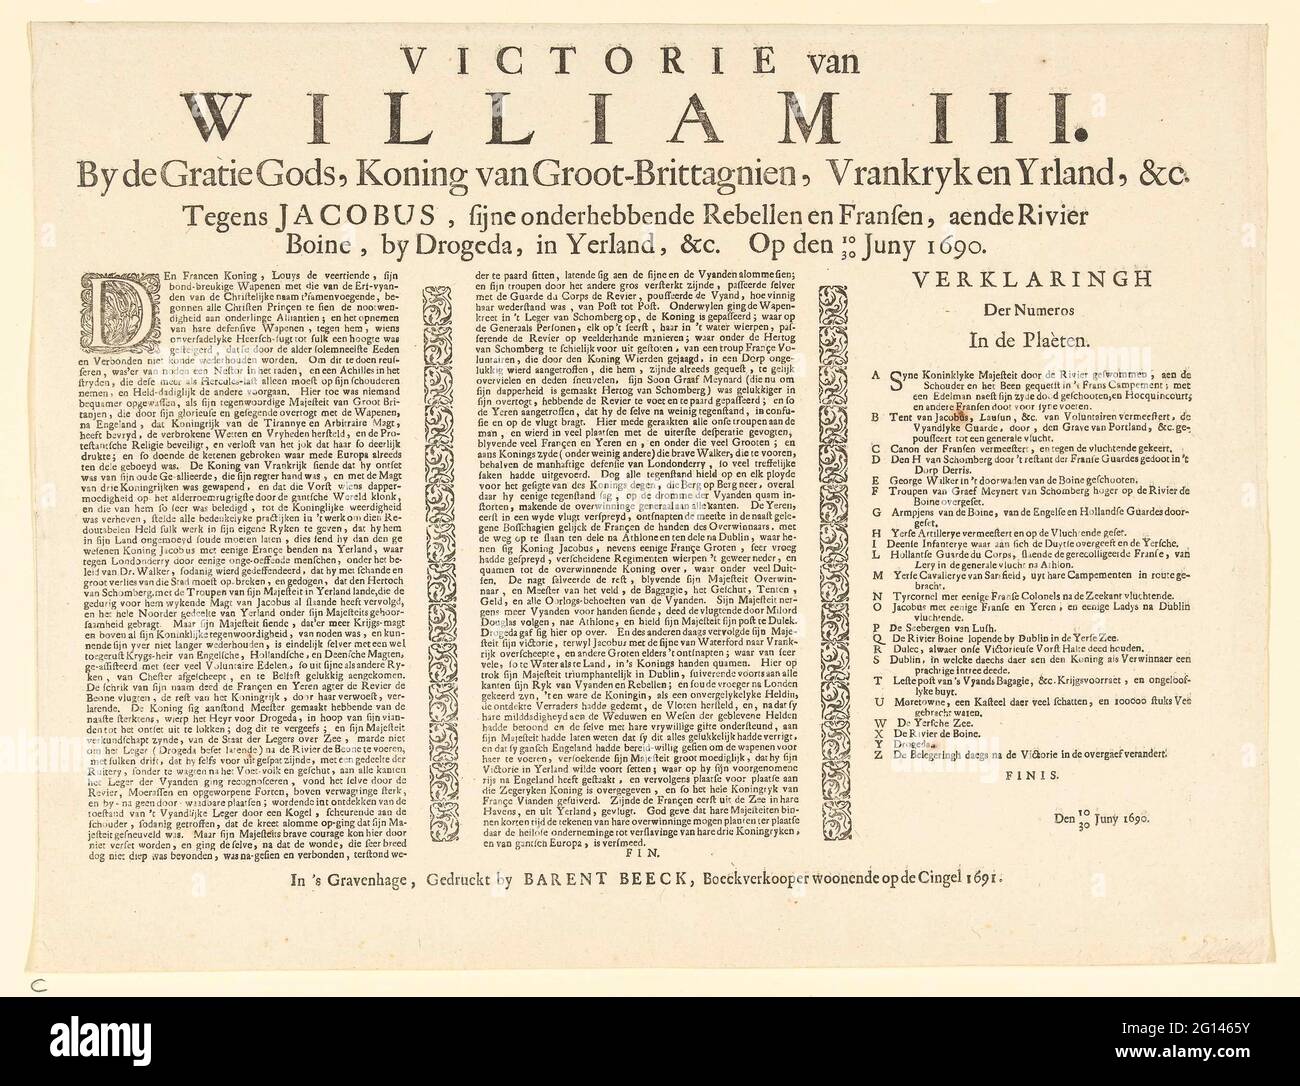 Victory of Willem III to the Boyne, 1690; Victory of William III. By the  grace of God, king of Great Britown, Vrankryk and Yrland, & c. Cons James,  by Drogeda, in Yerland,